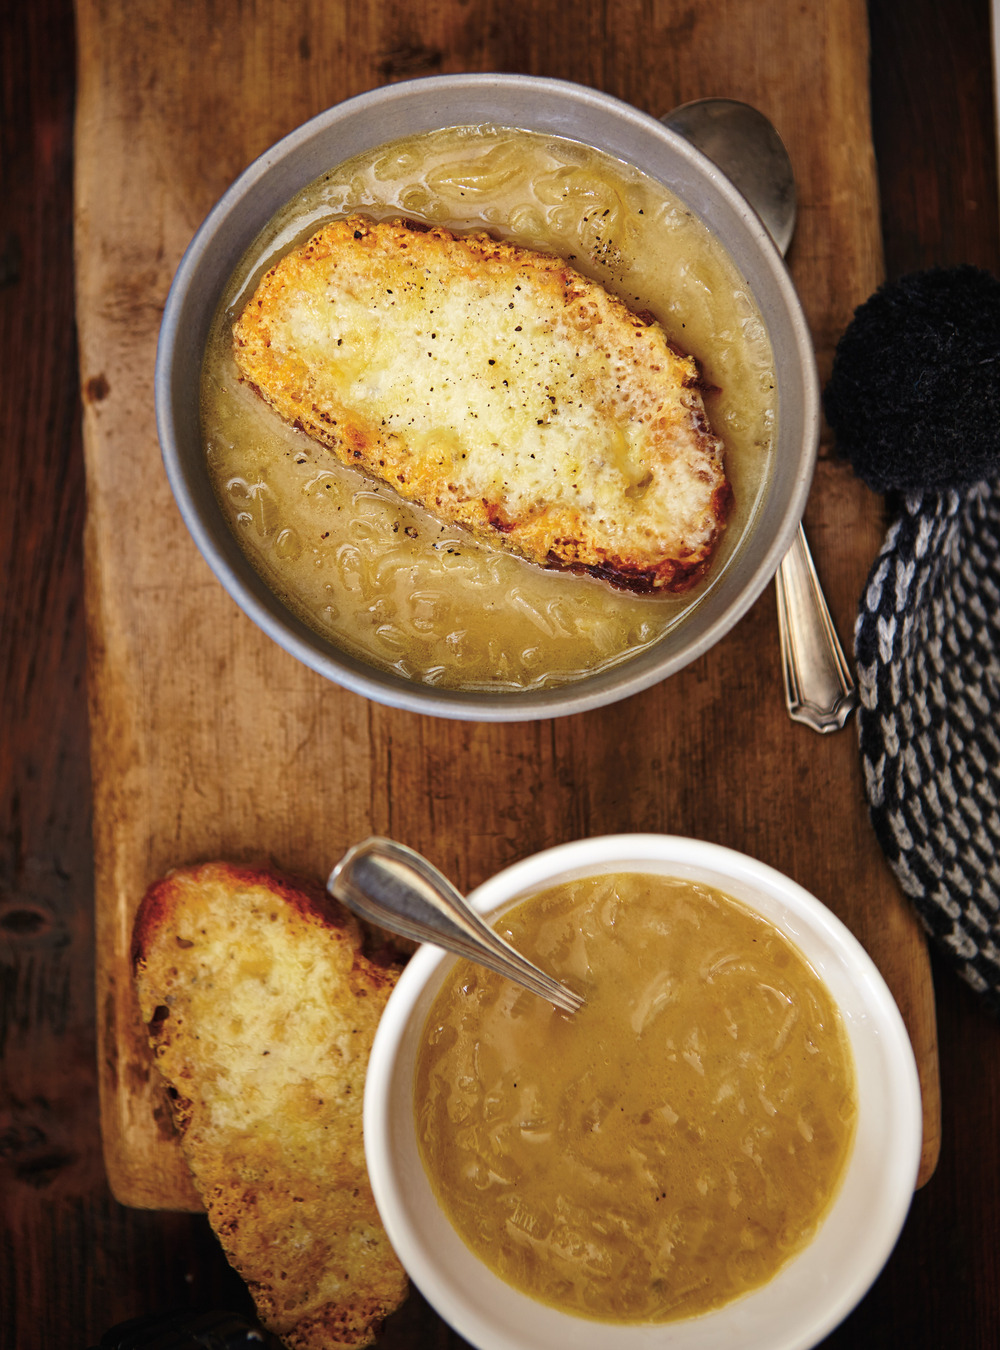 Creamy Onion Soup with Cheddar Croutons